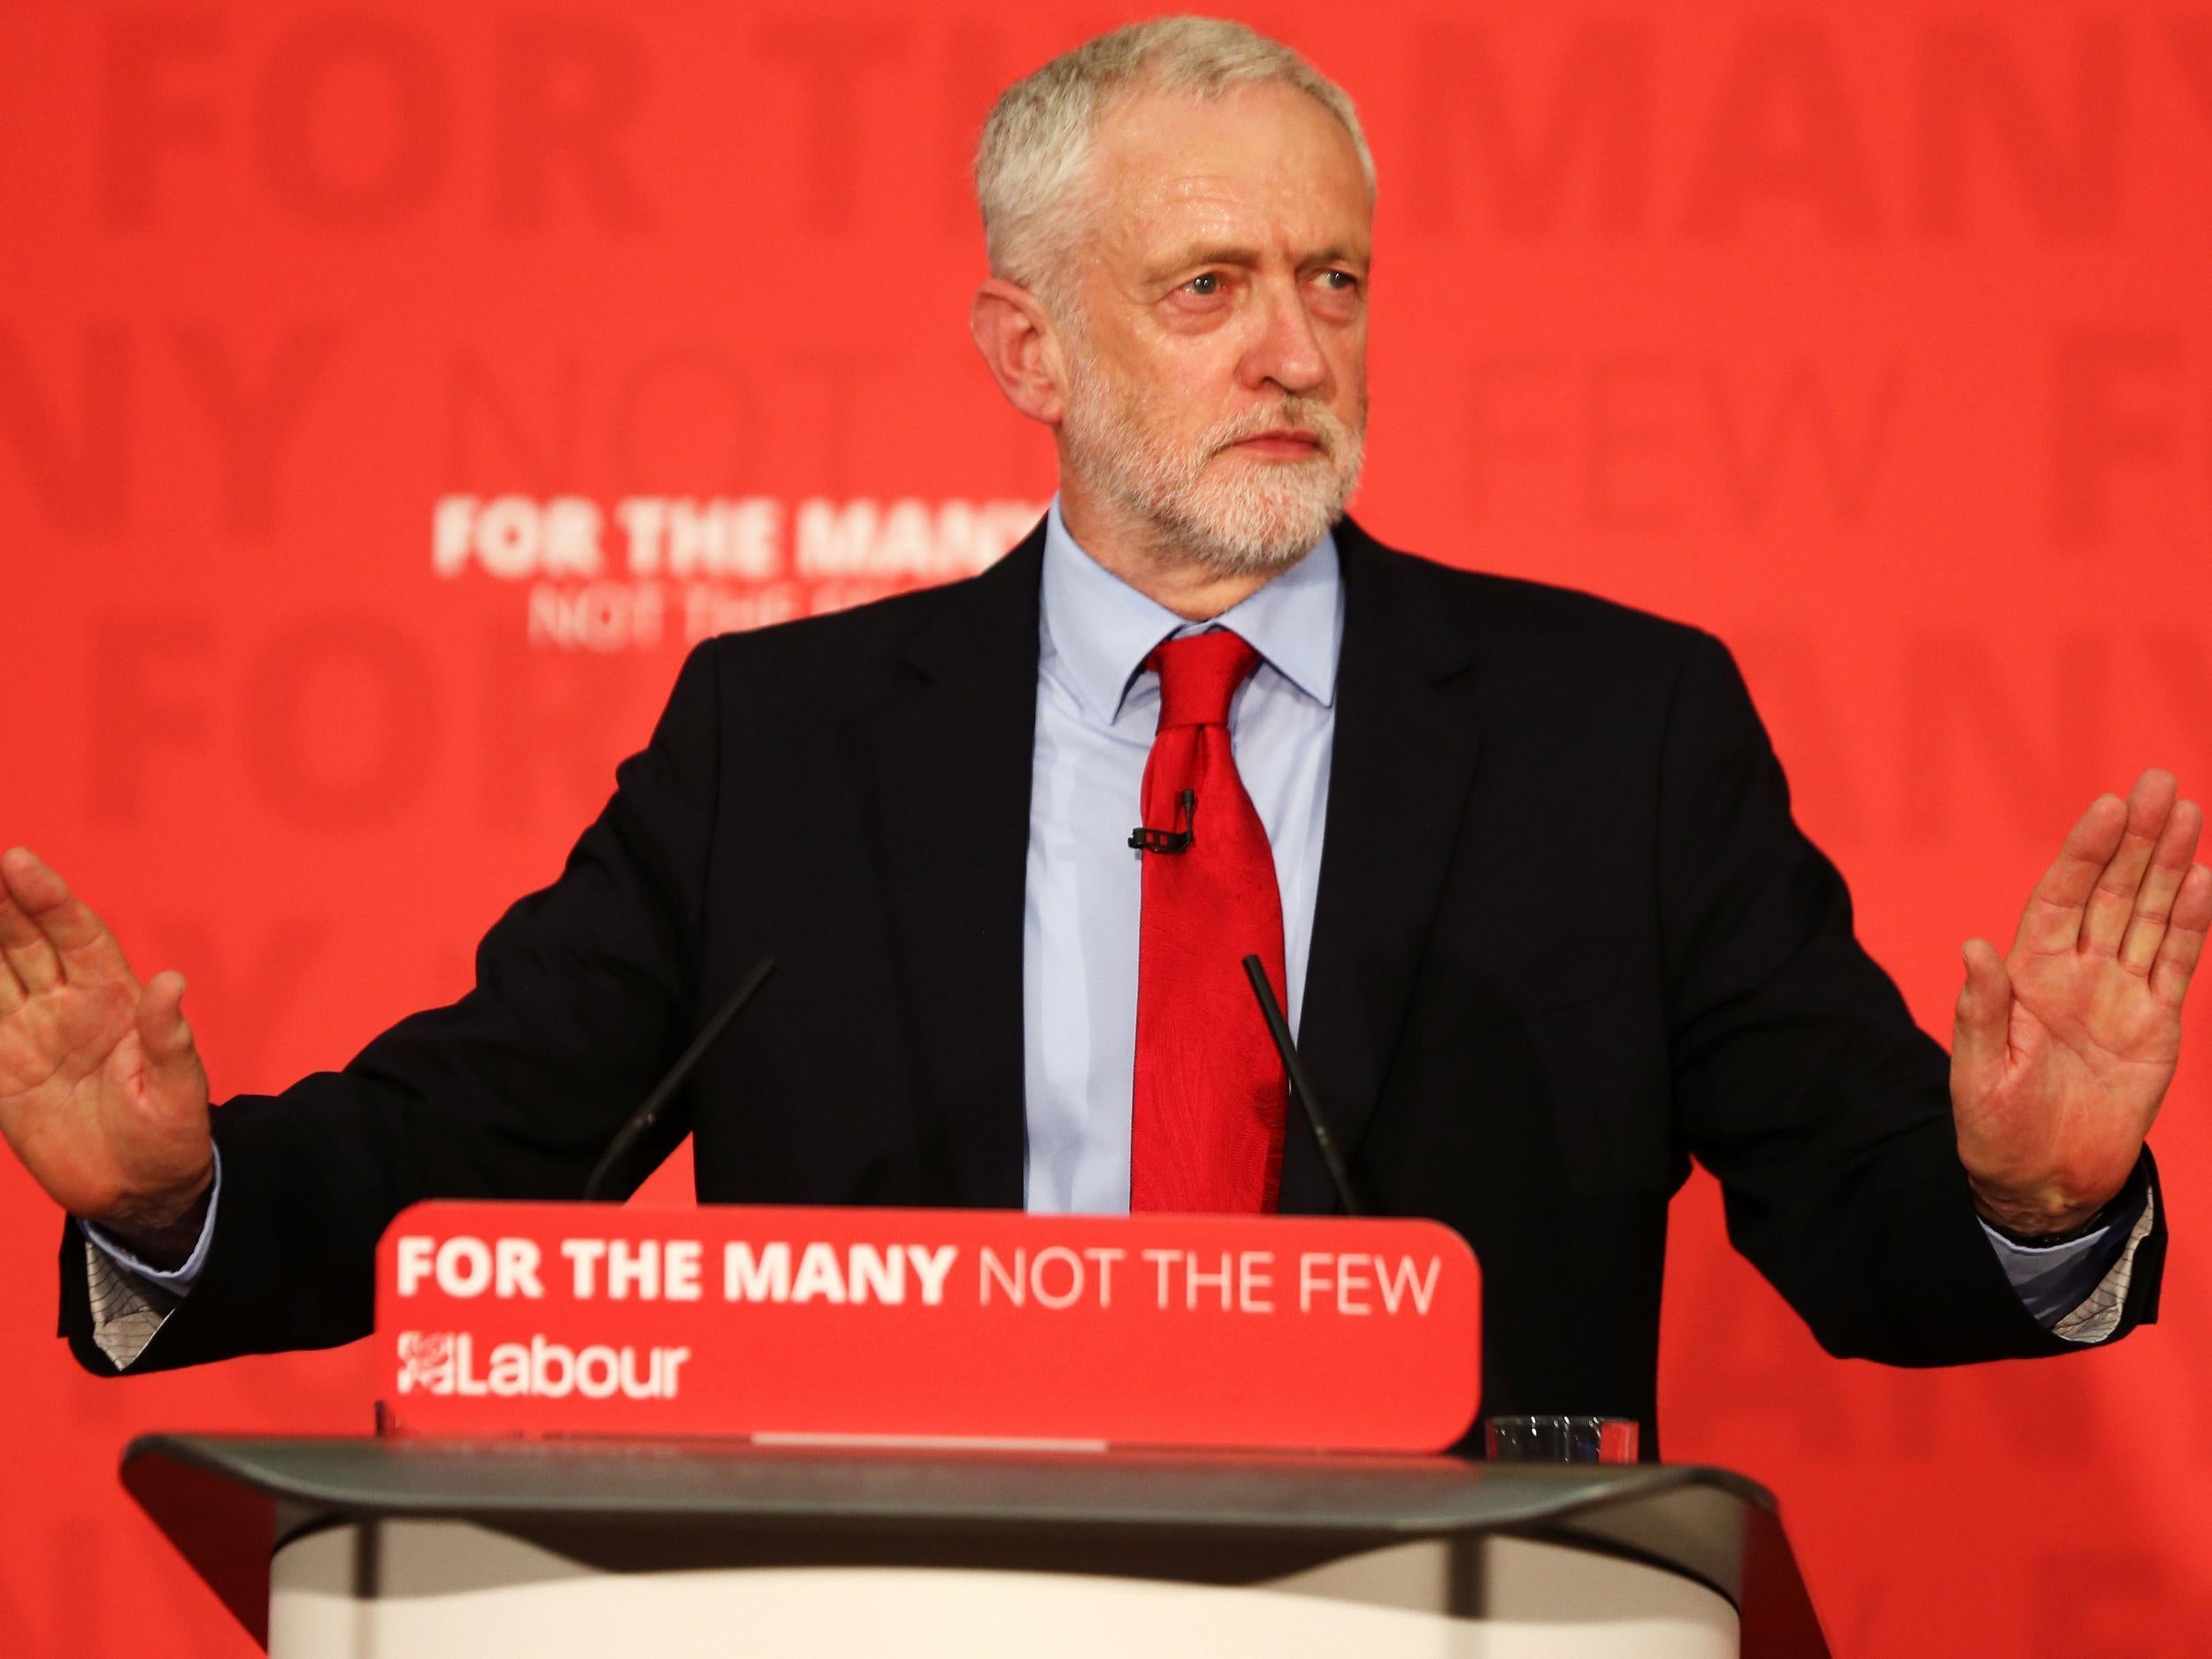 The Labour leader condemned the PM for failing to join other European leaders in defending the Paris Agreement